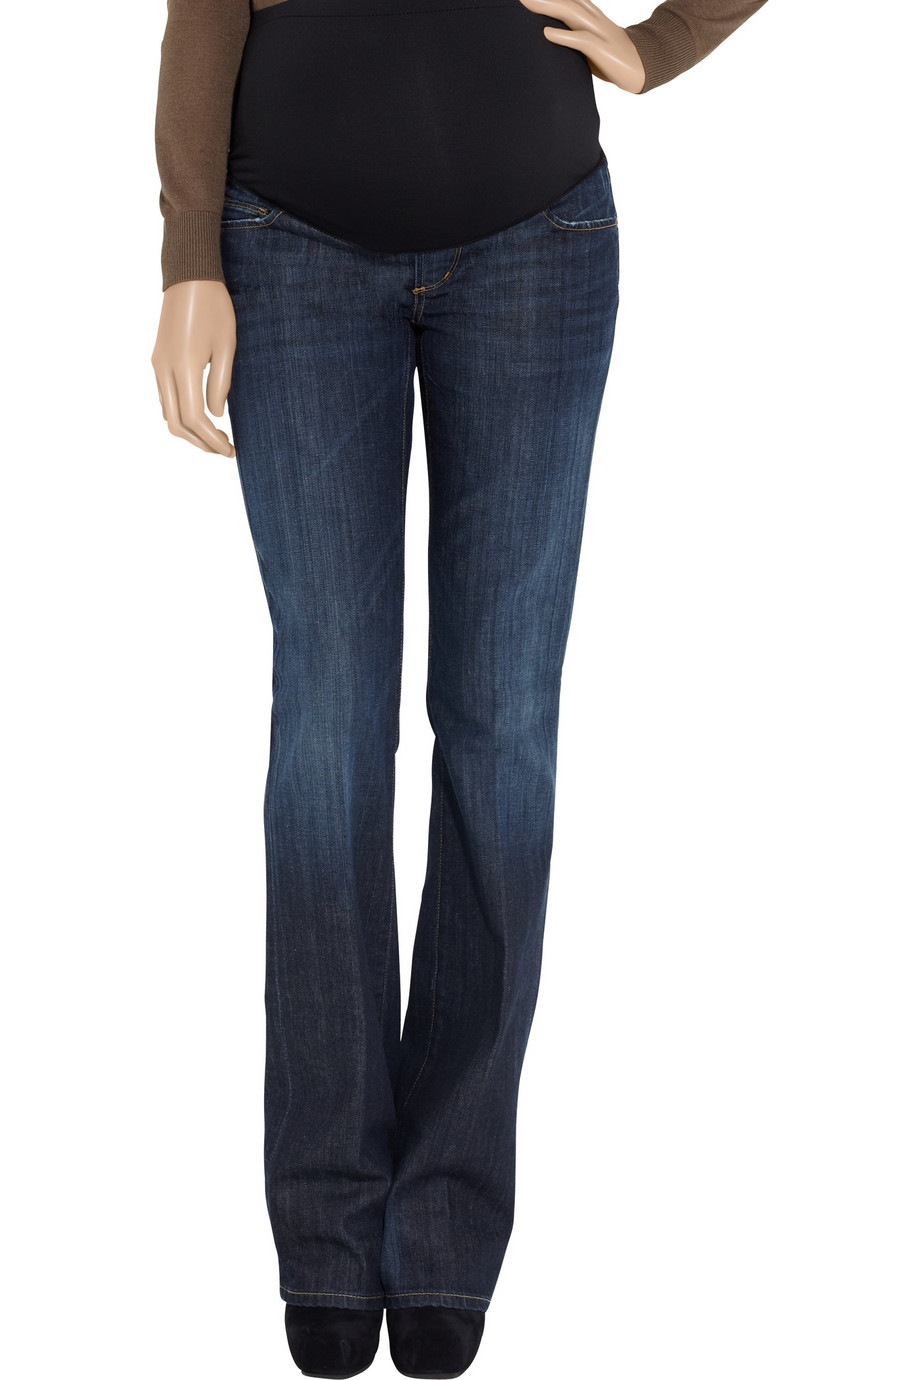 Citizens of Humanity Kelly Bootcut Maternity Jeans in Denim (Blue) - Lyst